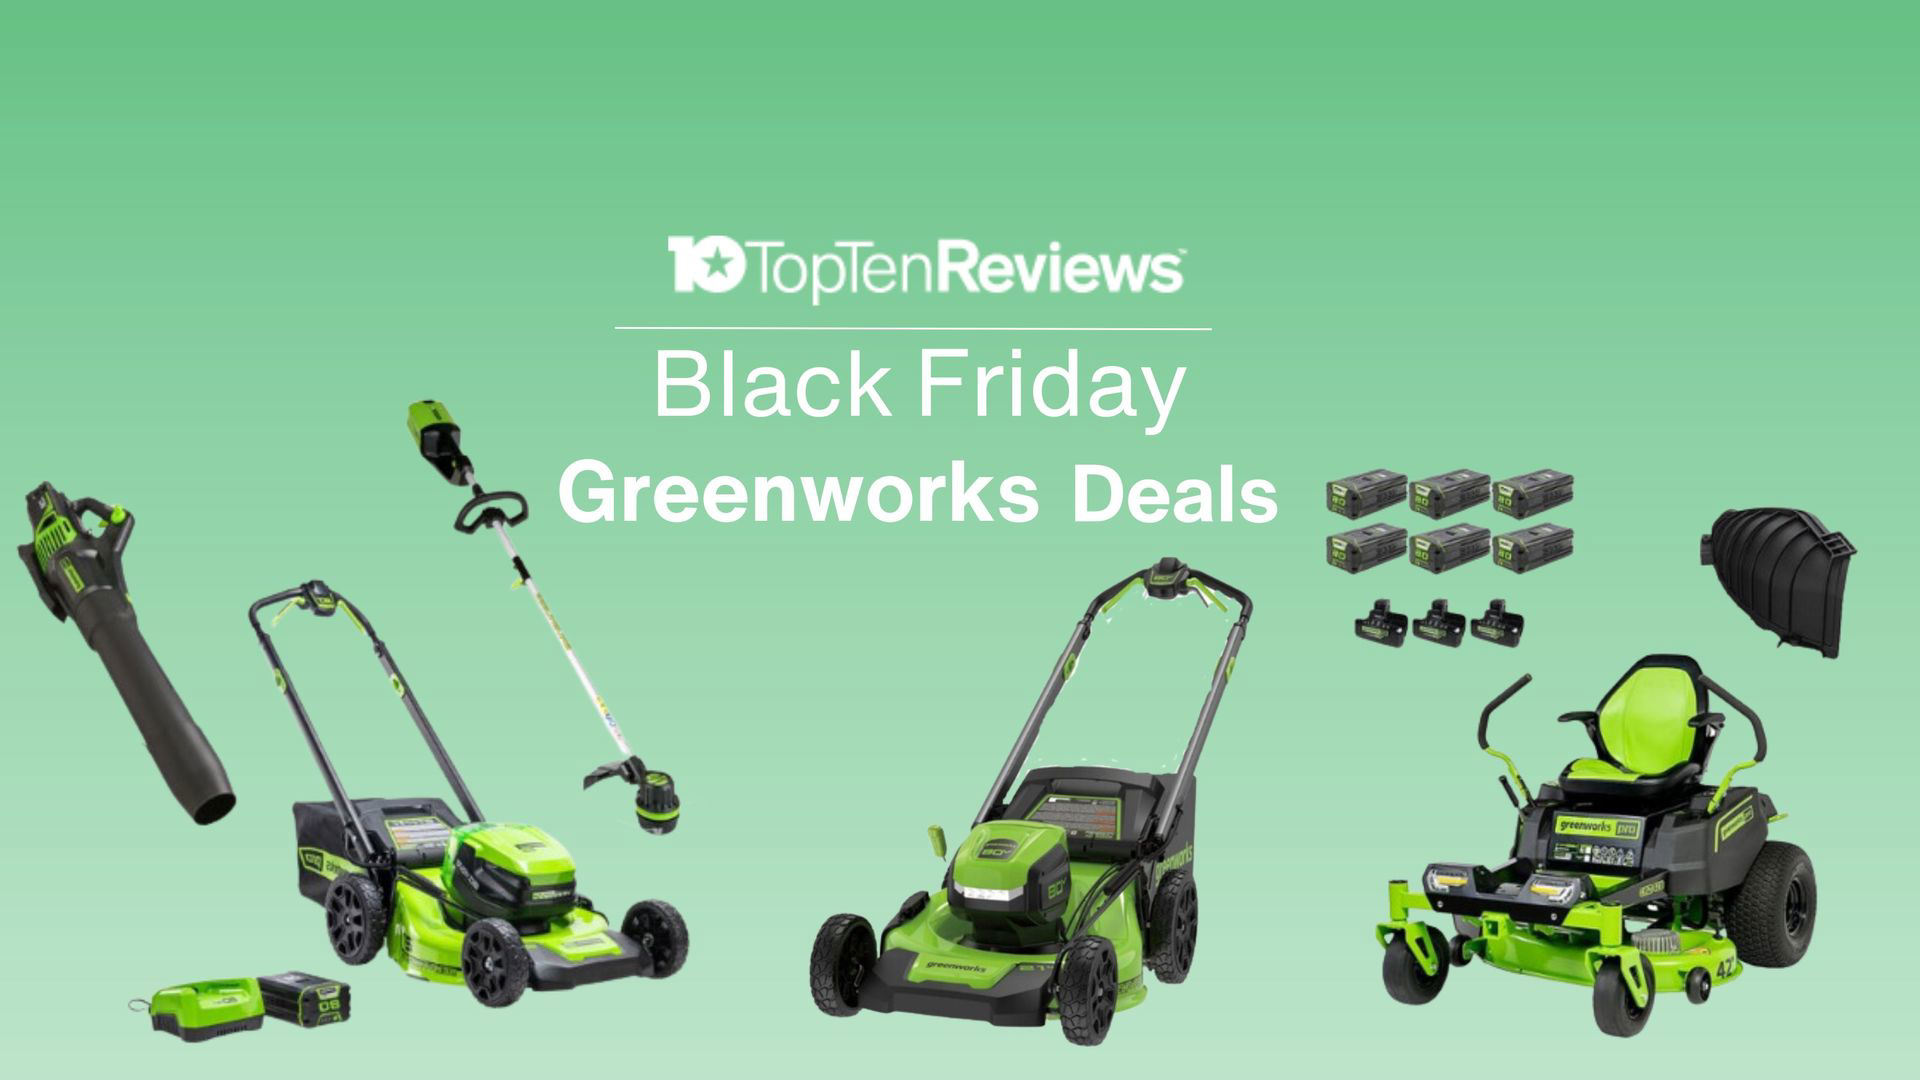 5 top Greenworks lawn mower deals you won't want to miss this Black